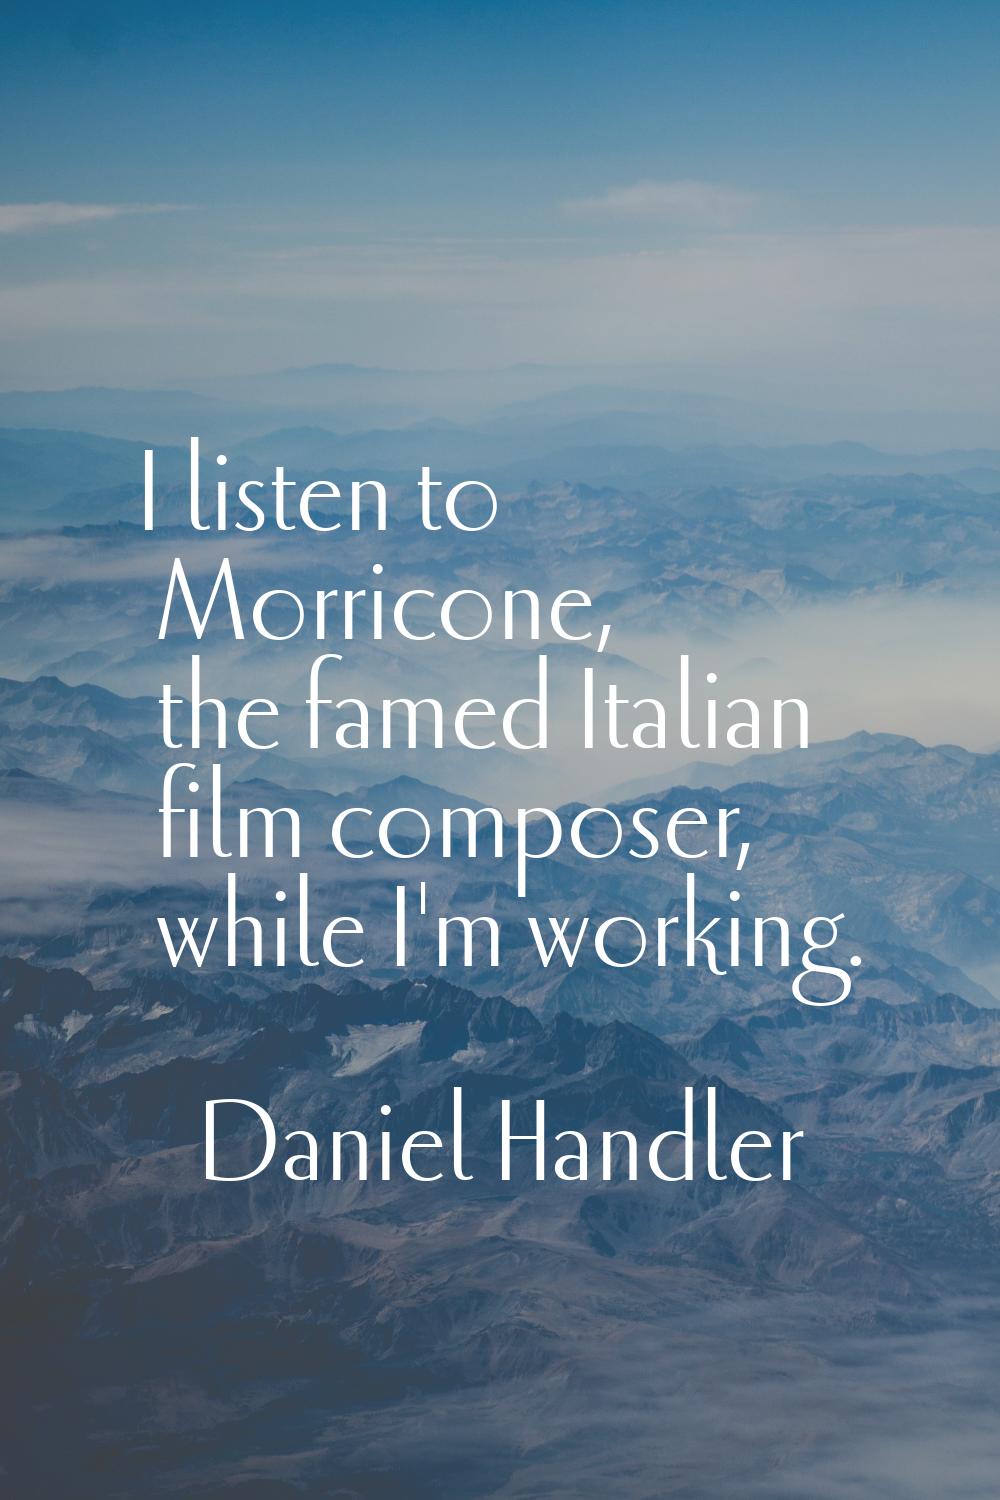 I listen to Morricone, the famed Italian film composer, while I'm working.